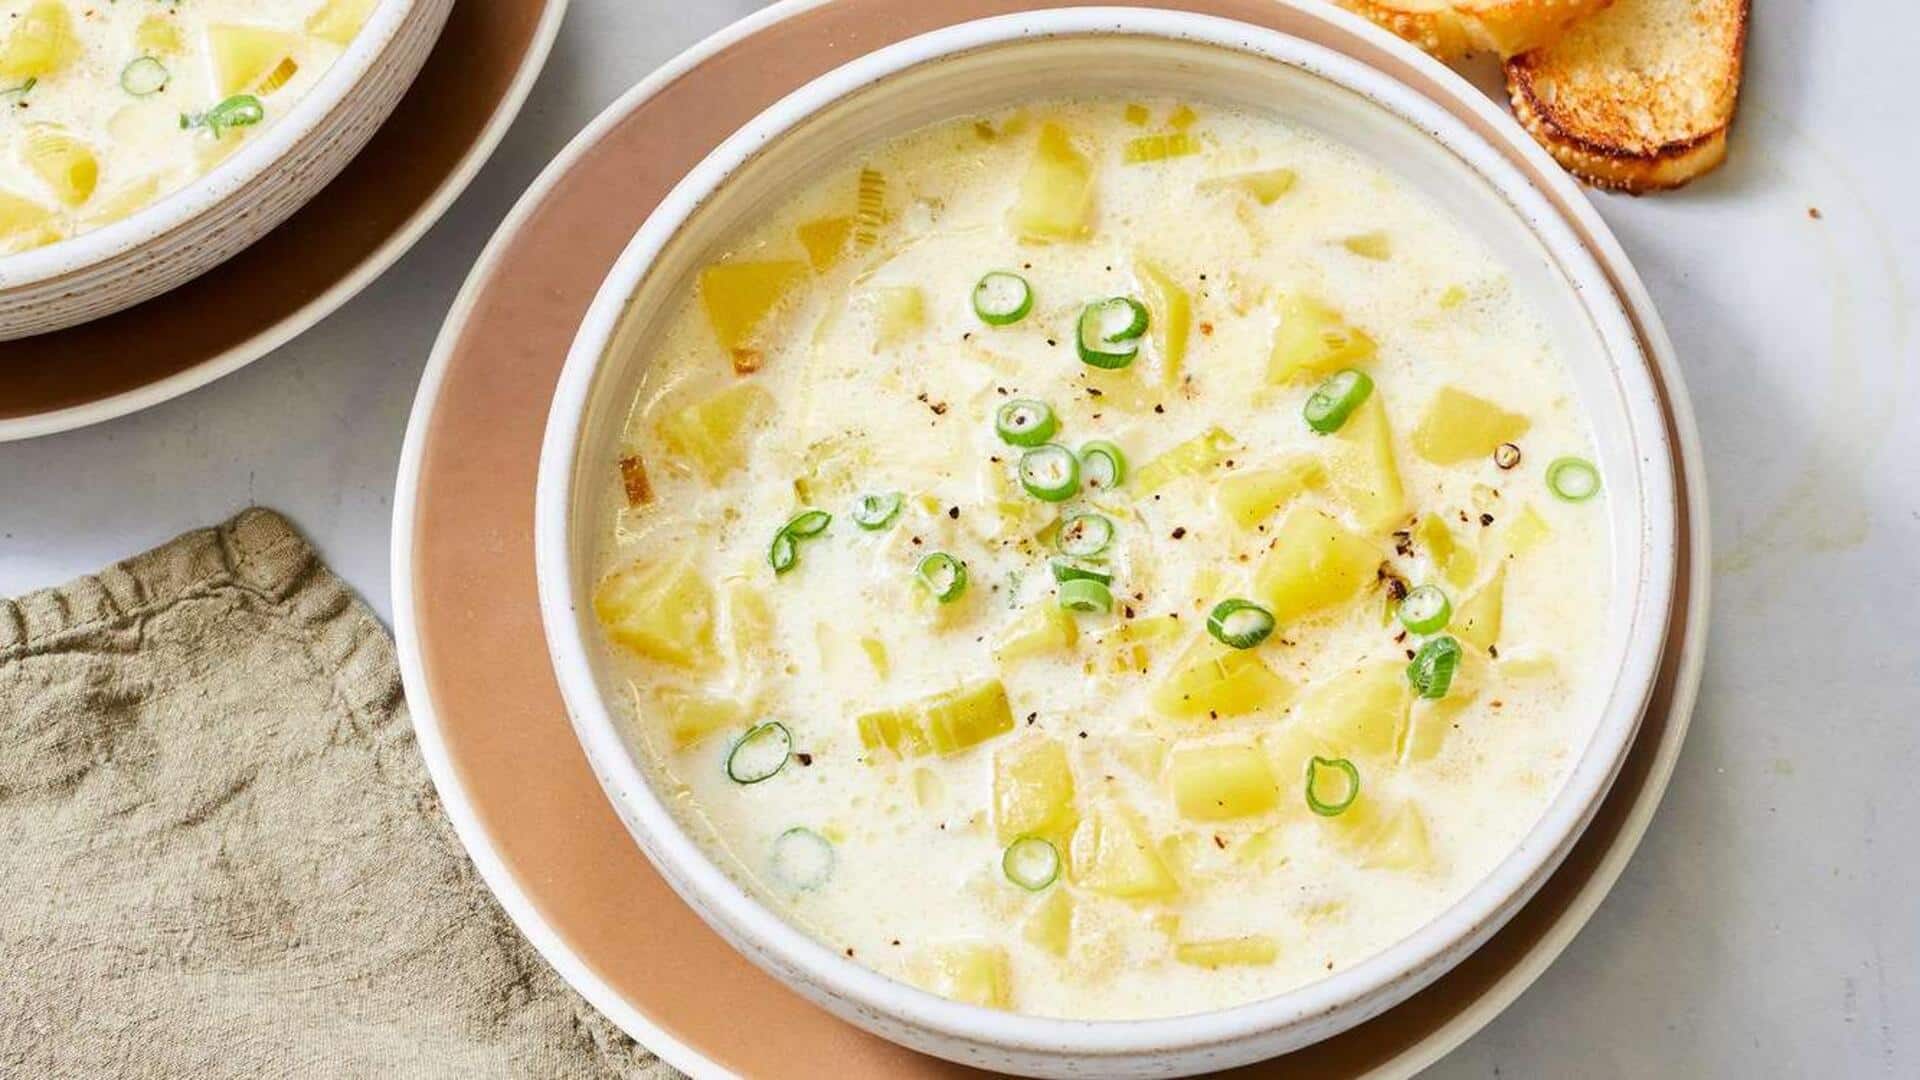 Your guests will love this Belgian leek and potato soup